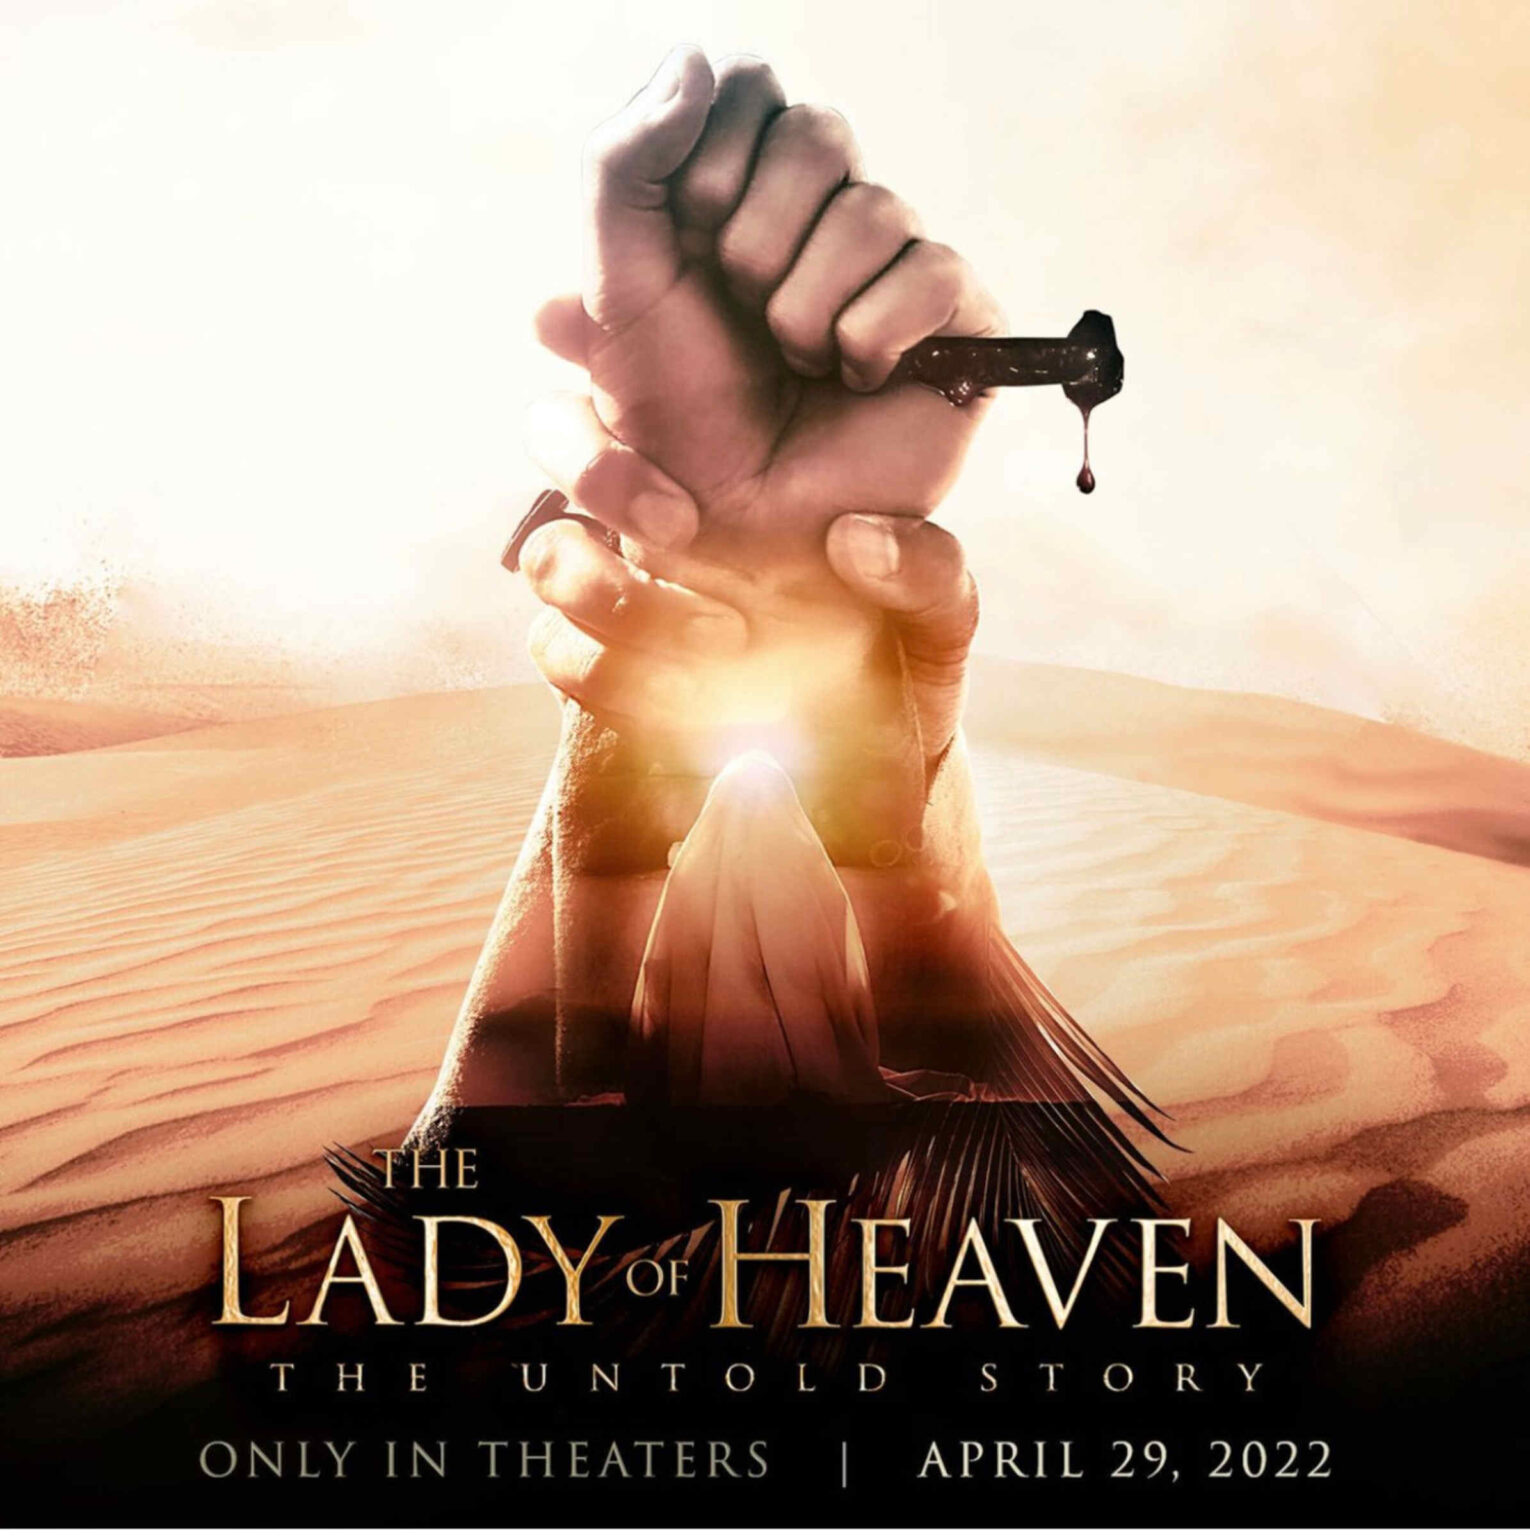 Watch Eli King's 'The Lady of Heaven' and see the story of Lady Fatima unfold before the eyes of a young boy learning the power of patience.